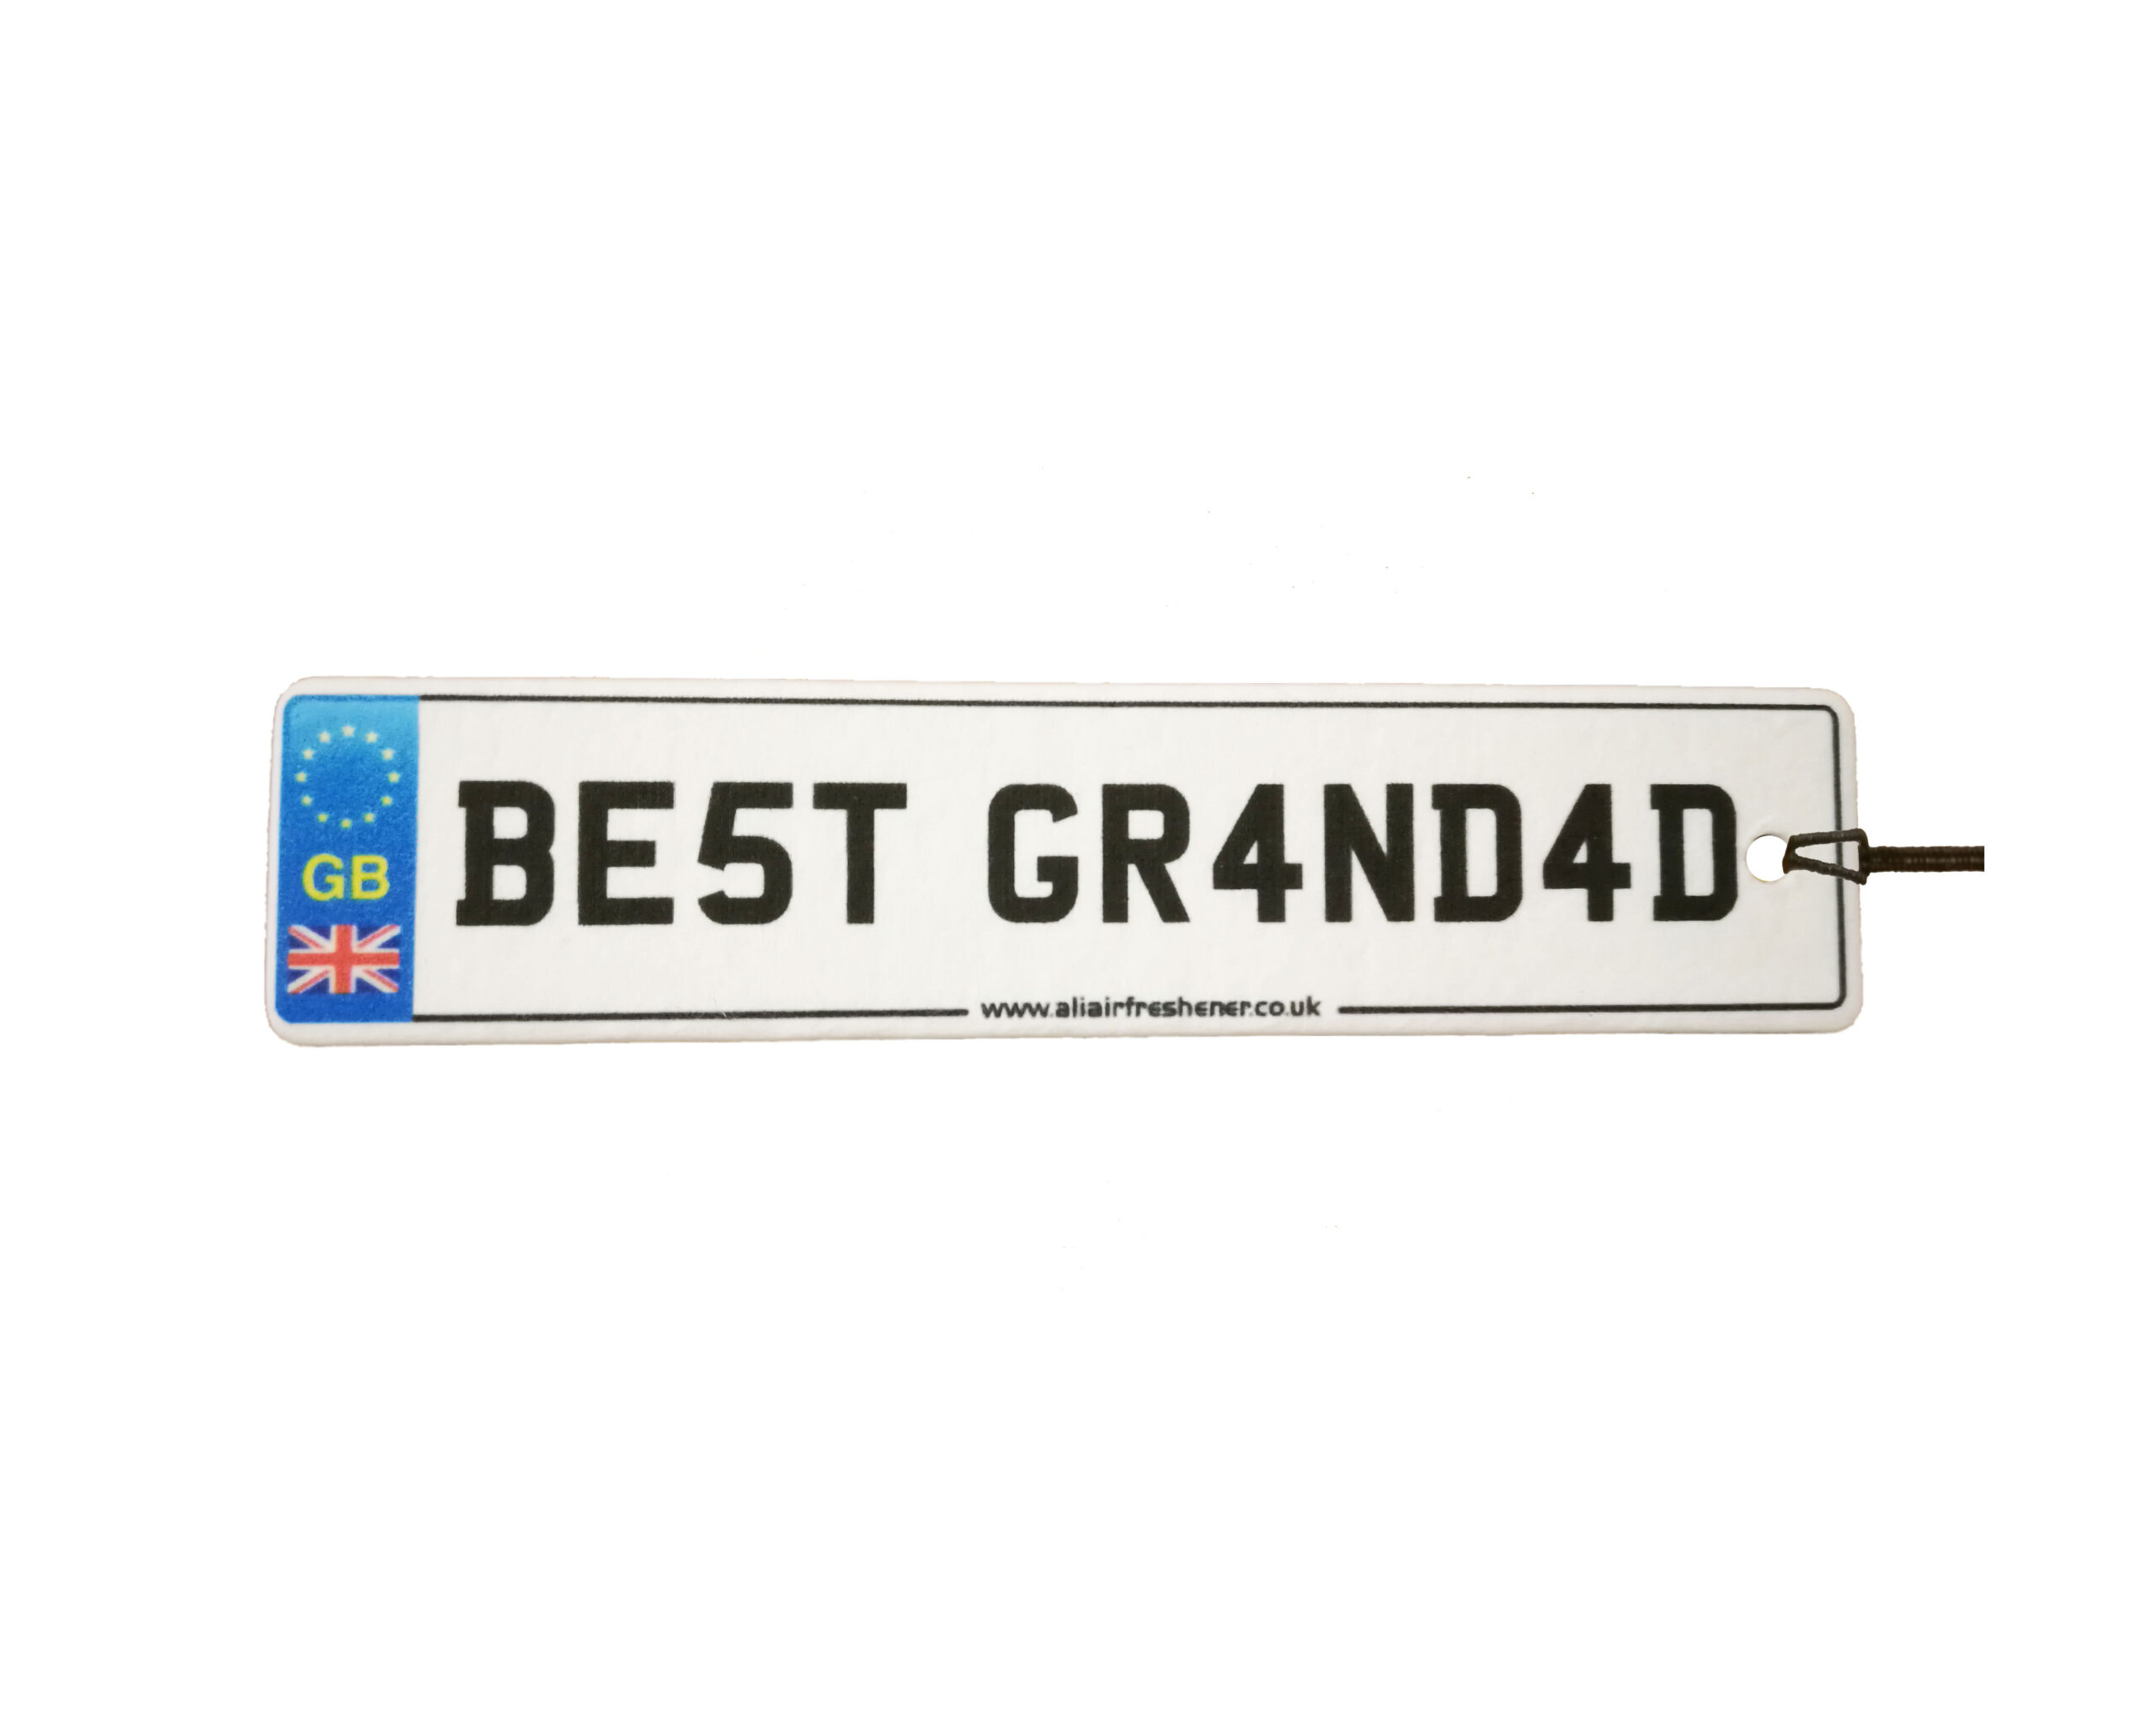 BE5T GR4ND4D Number Plate